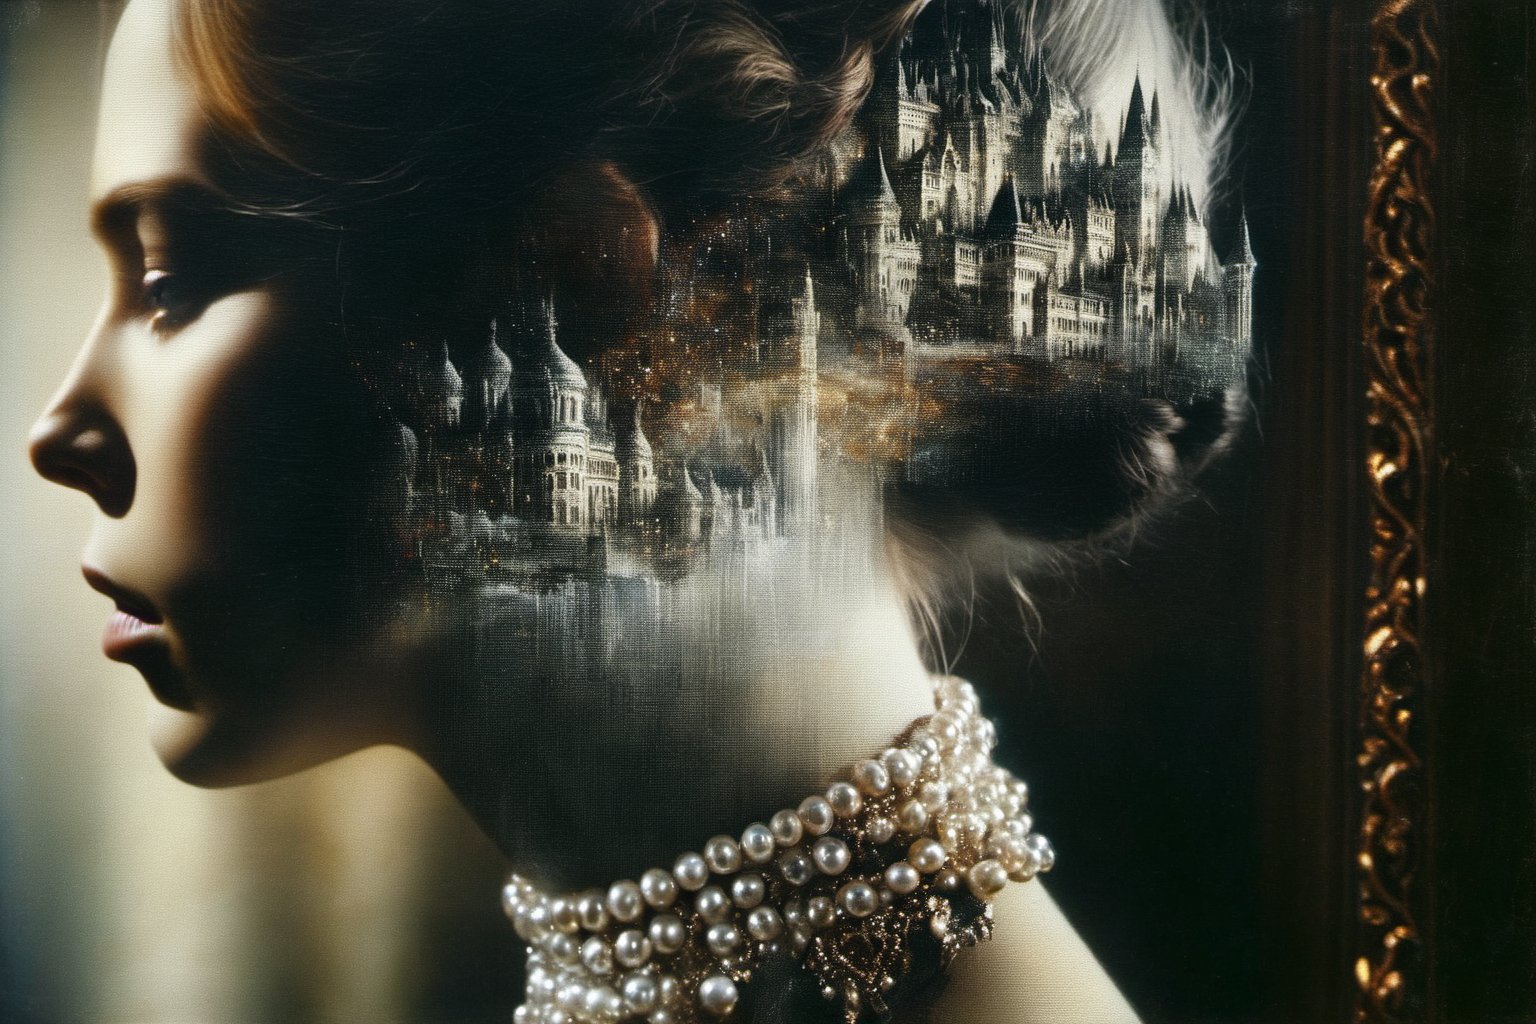 a 4D Double Exposure: portrait of a ((transparent woman with a double exposure castle city in her head)), in renaissance attire castle backdrop, oil painting, 3/4 profile view,  ornate pearl necklaces, sumptuous fabrics, detailed embroidery, moody chiaroscuro lighting, high-resolution